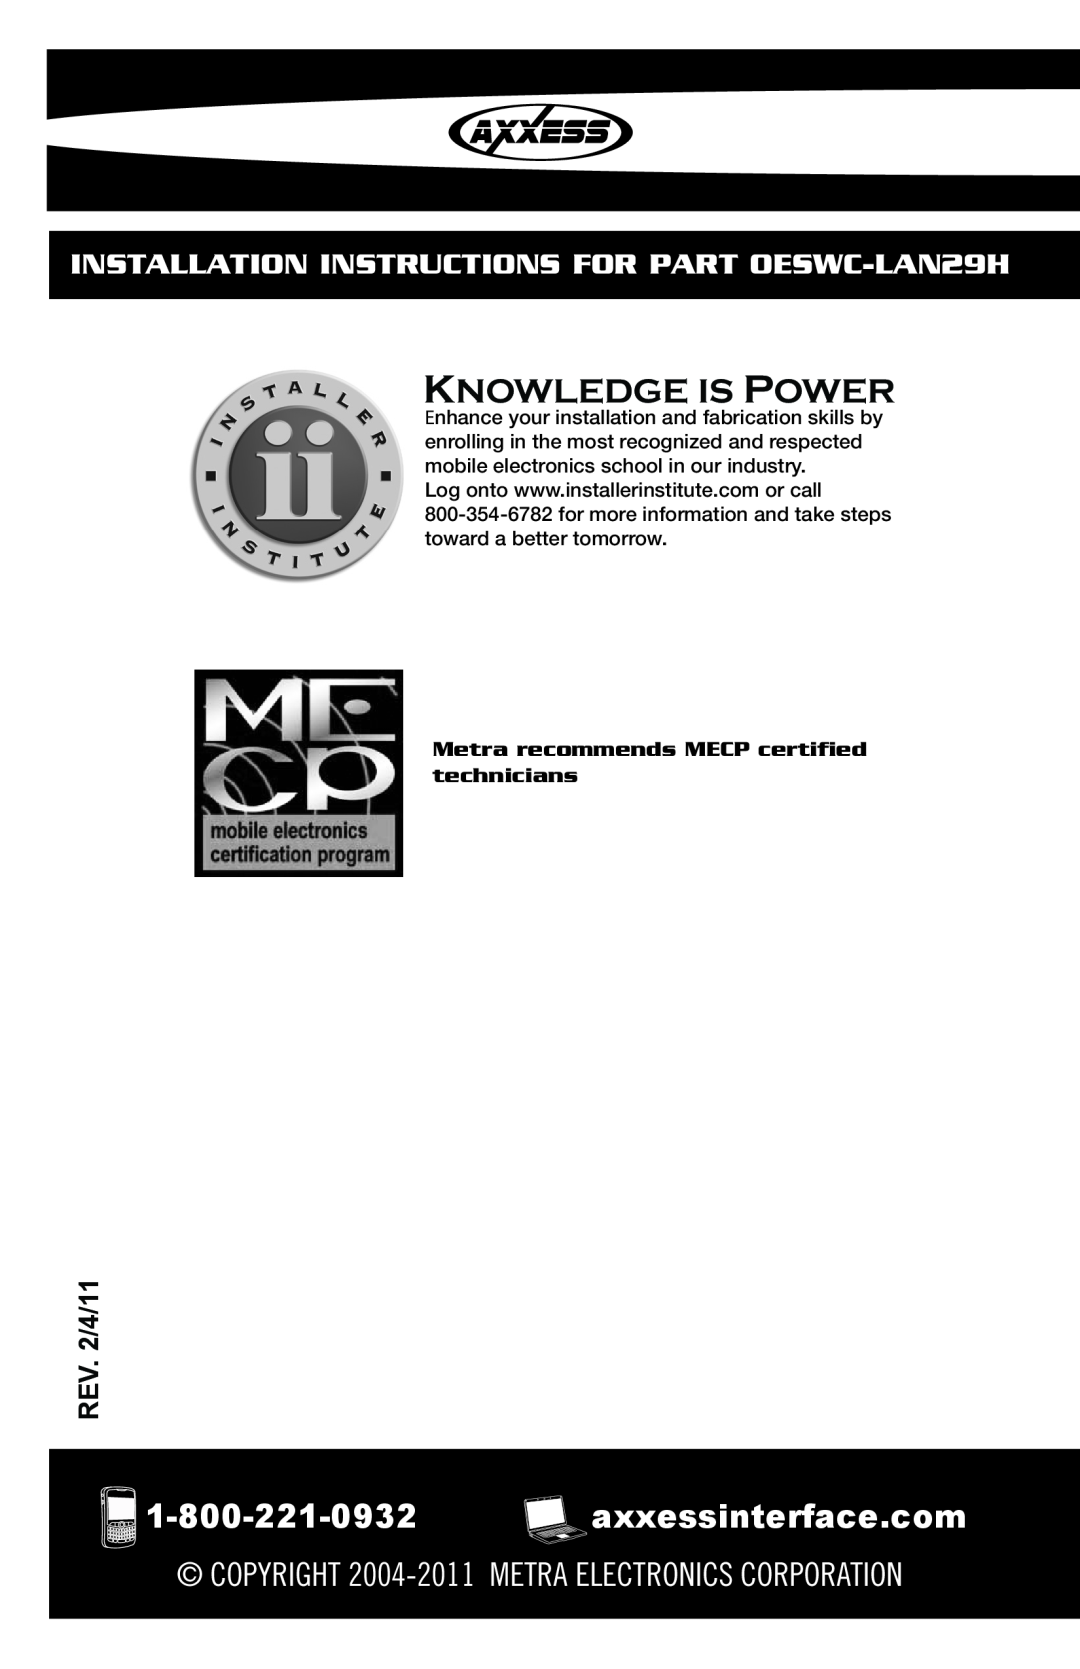 Axxess Interface Knowledge Is Power, INSTALLATION INSTRUCTIONS FOR PART OESWC-LAN29H, REV. 2/4/11 